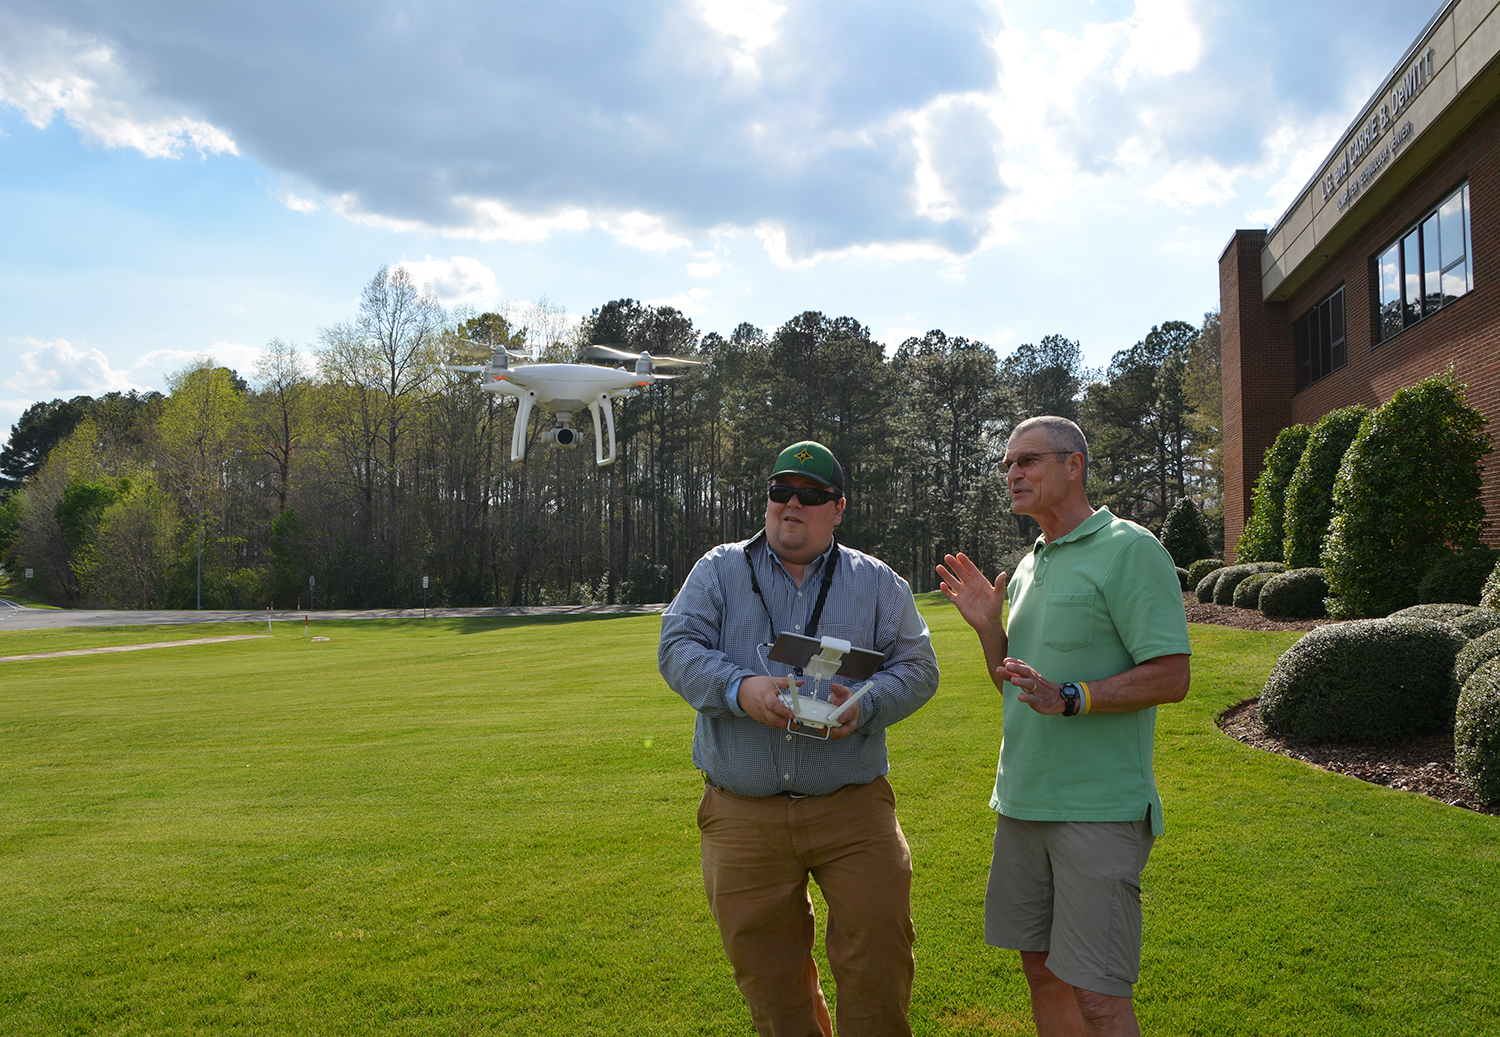 Drone instructor showing another man how to fly a drone